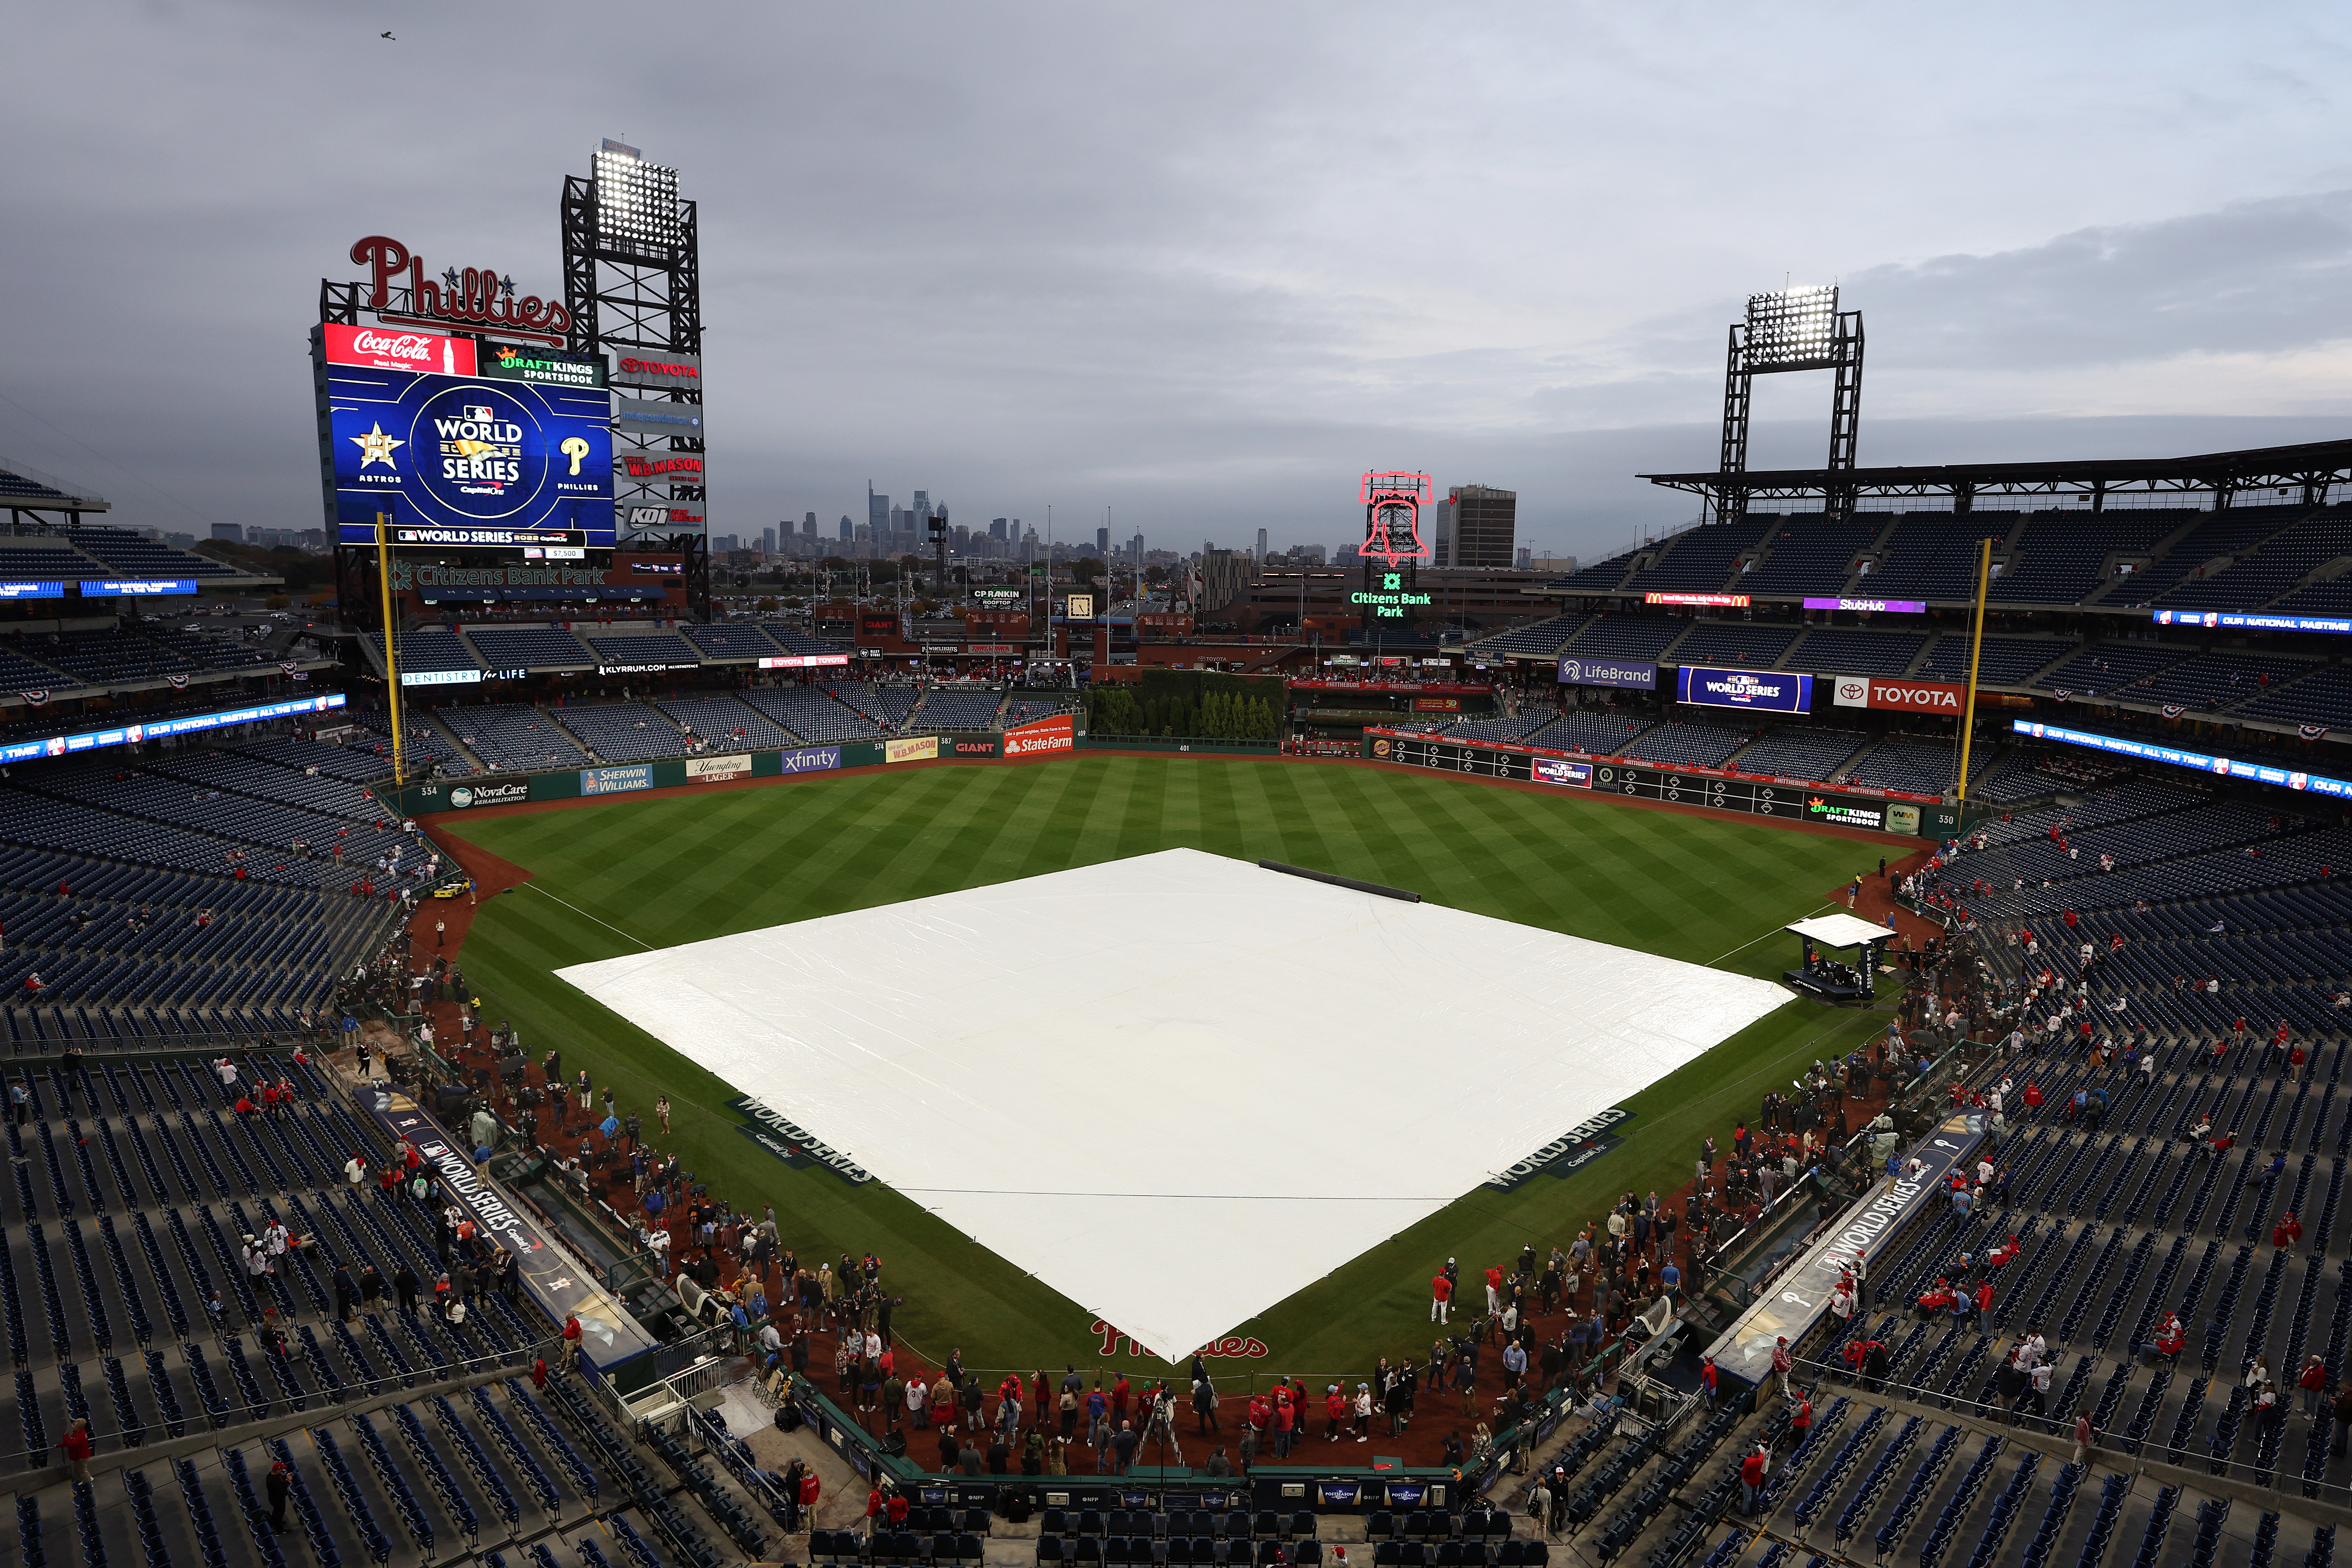 Game 3 postponement means changes to Phillies' World Series pitching plans  - The Boston Globe